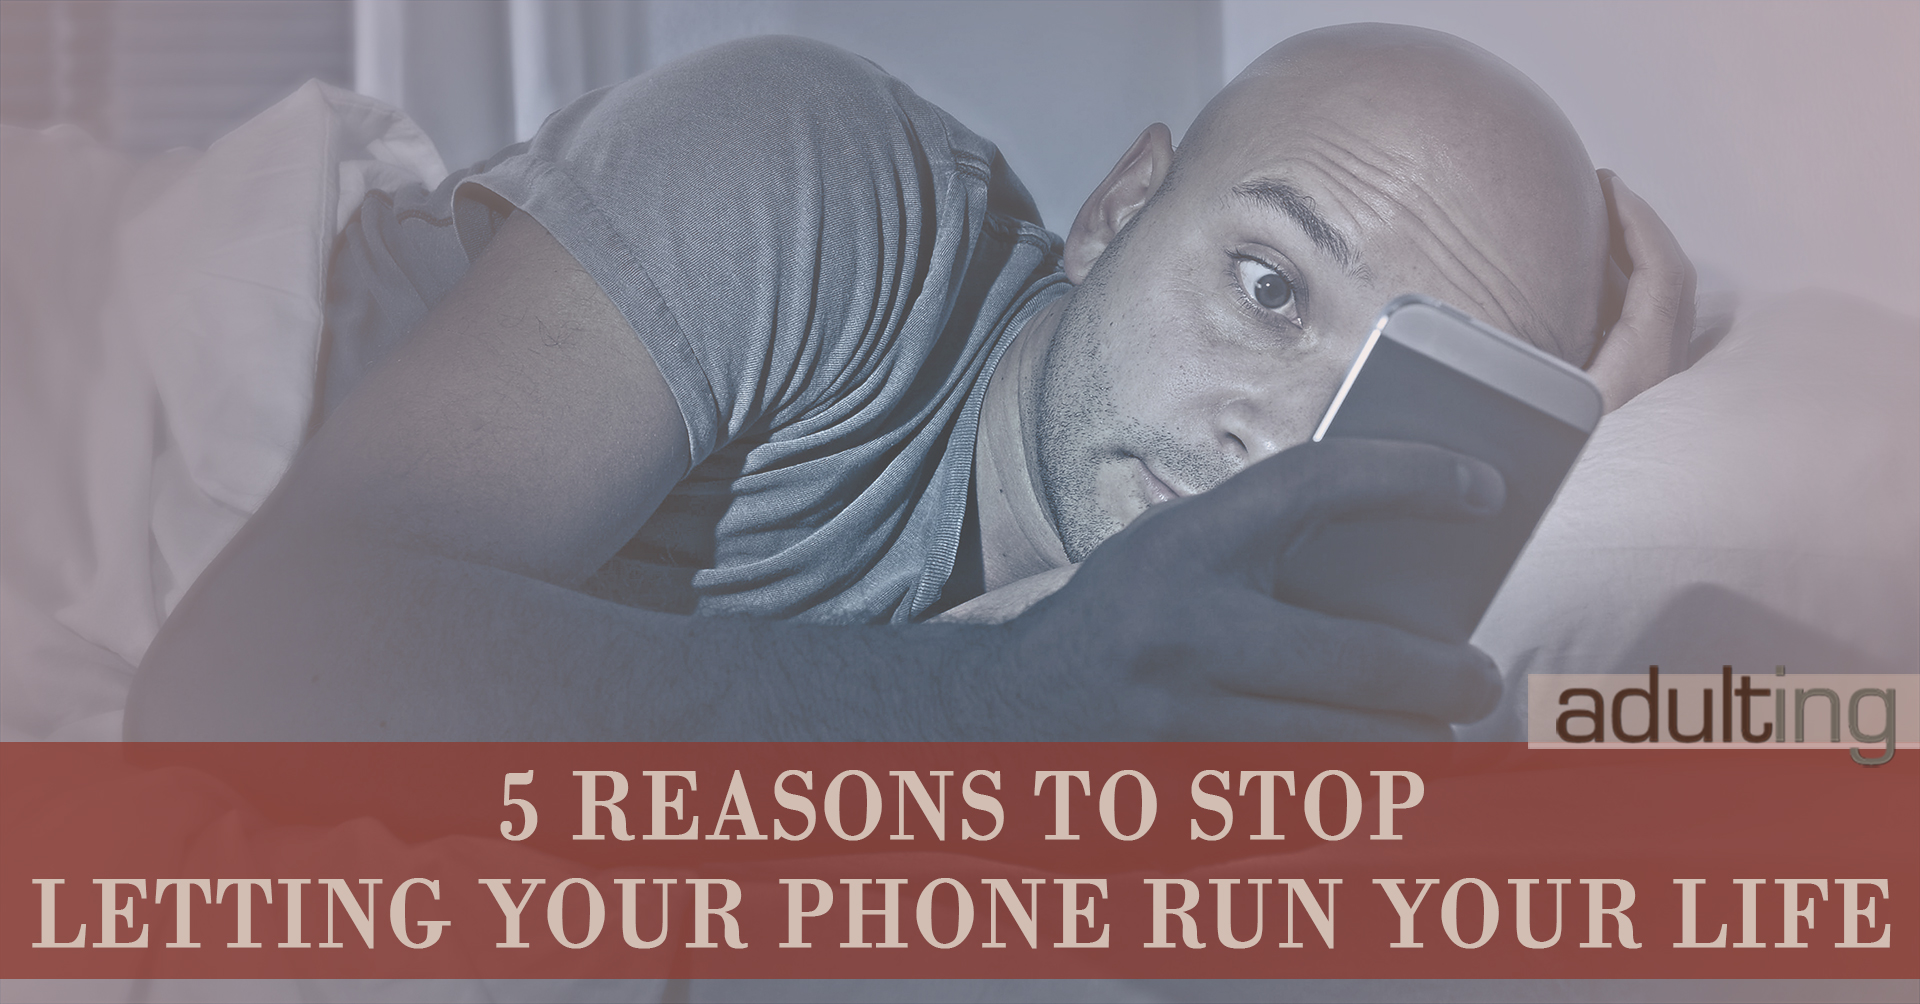 5 Reasons to Stop Letting Your Phone Ruin Your Life